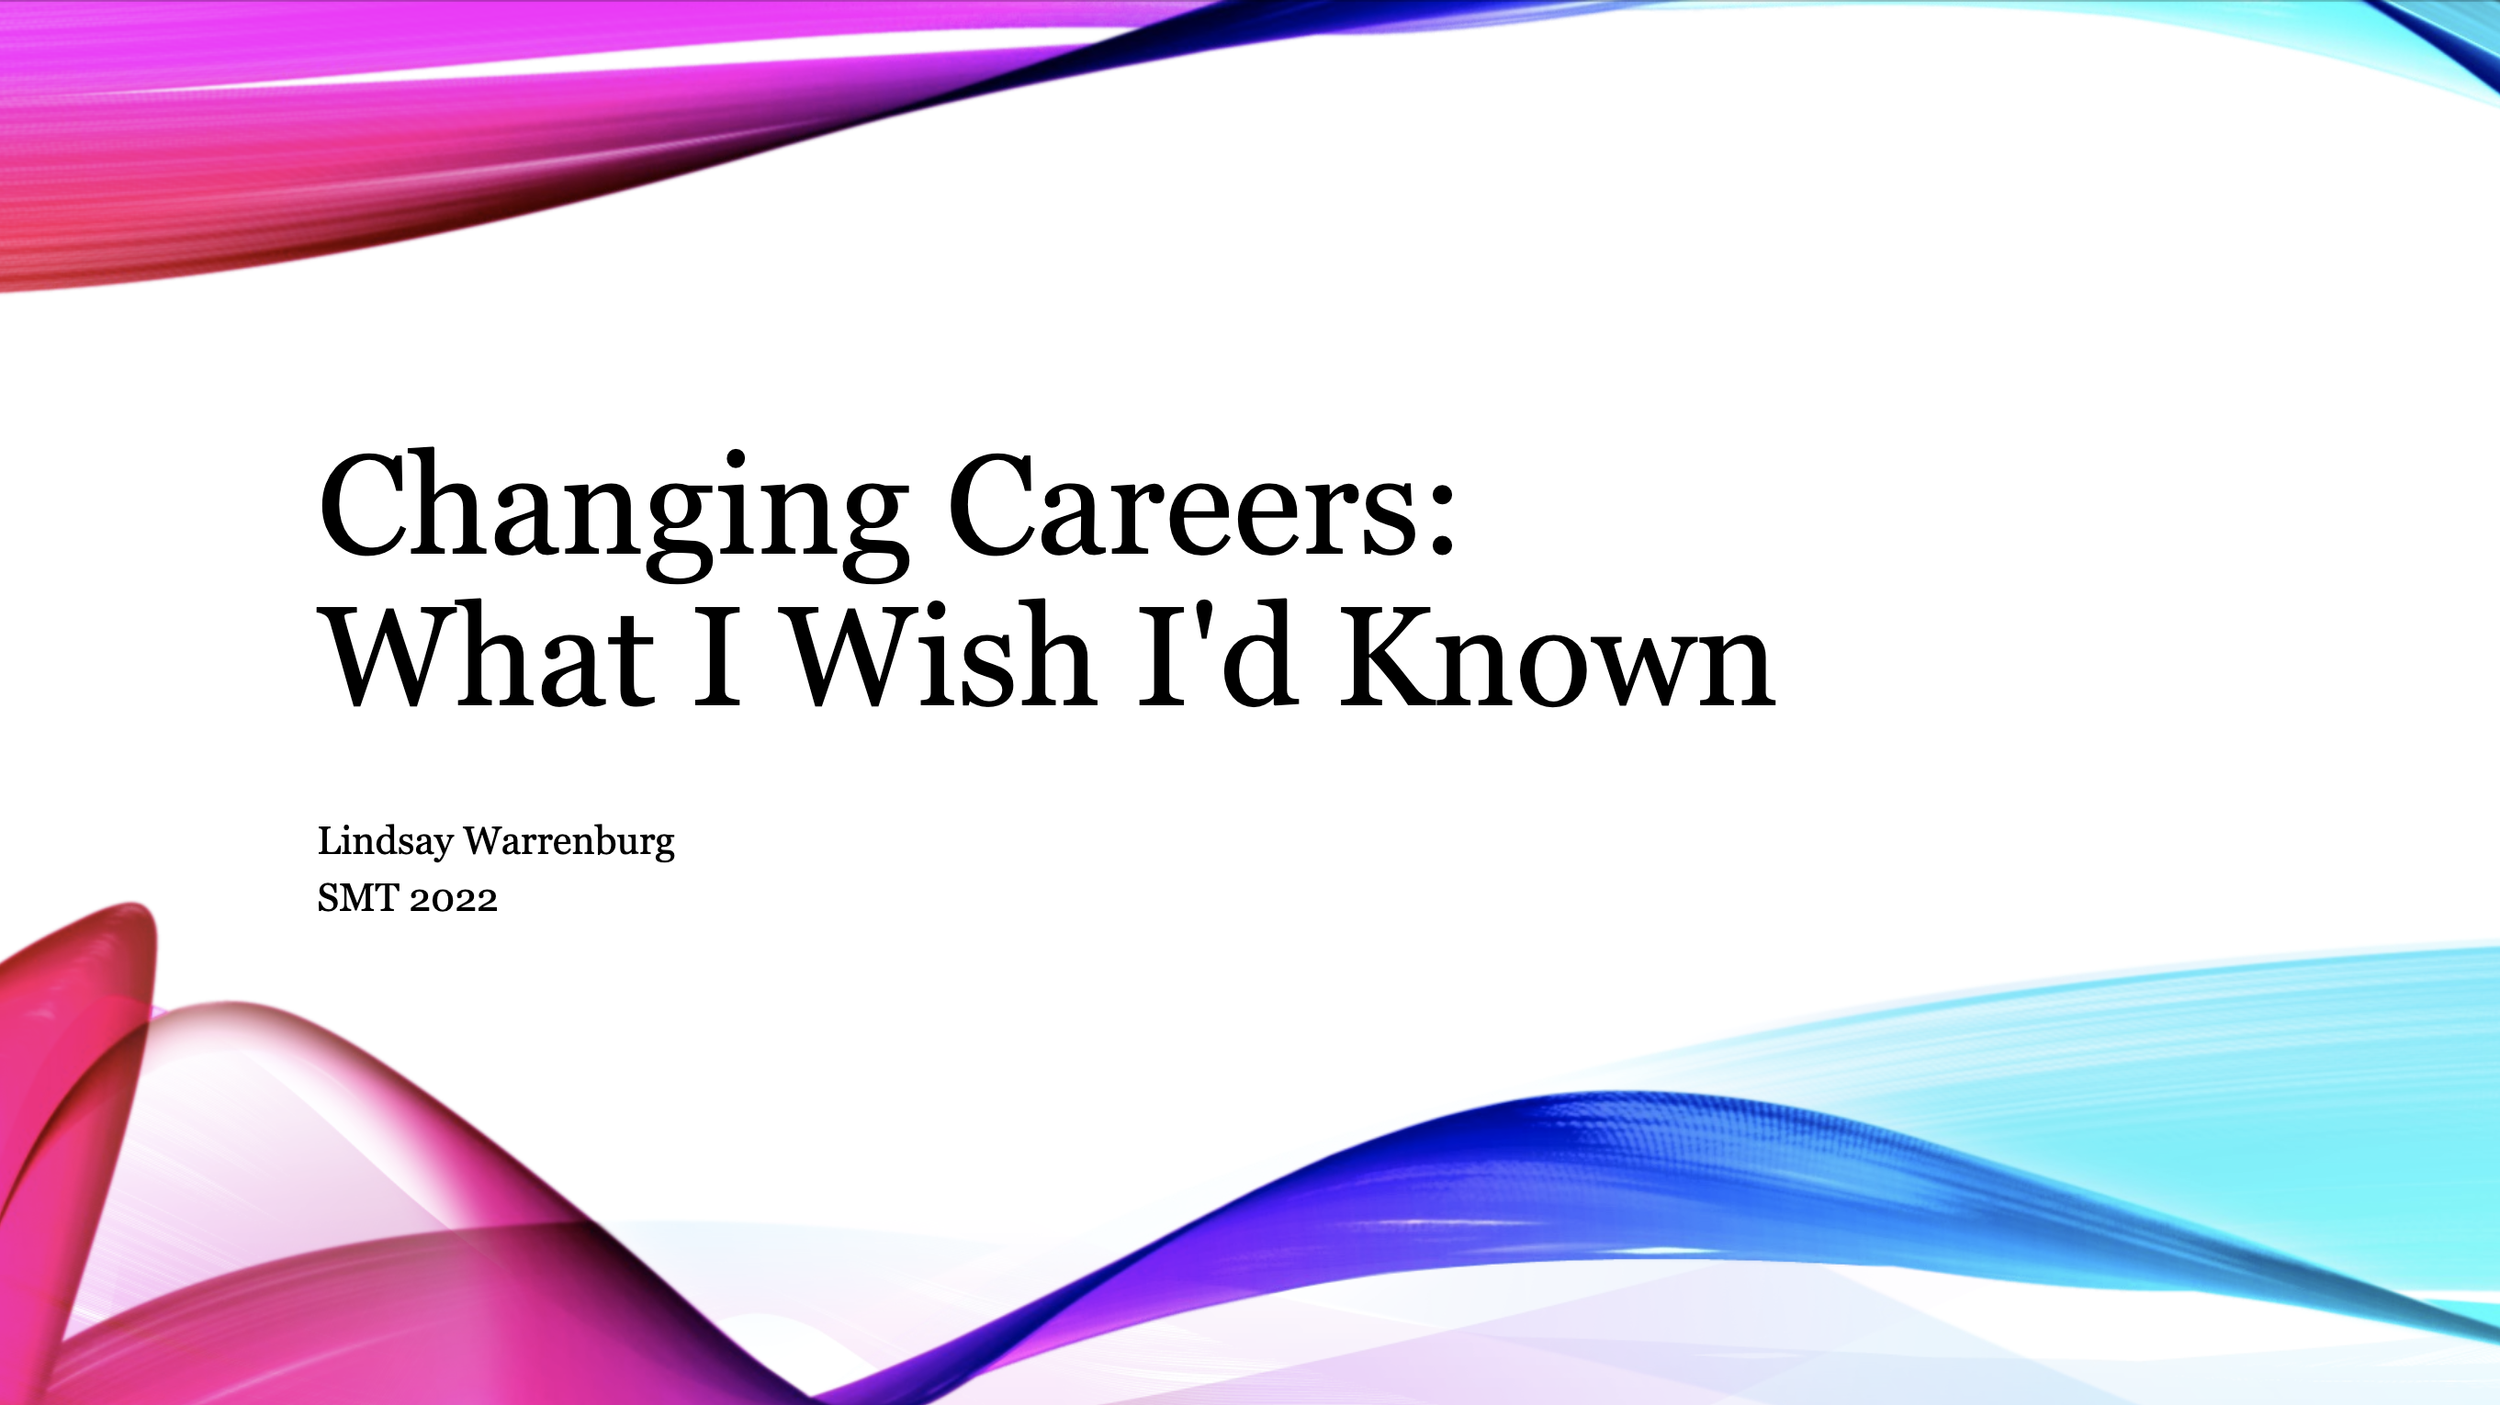 Changing Careers: What I Wish I'd Known